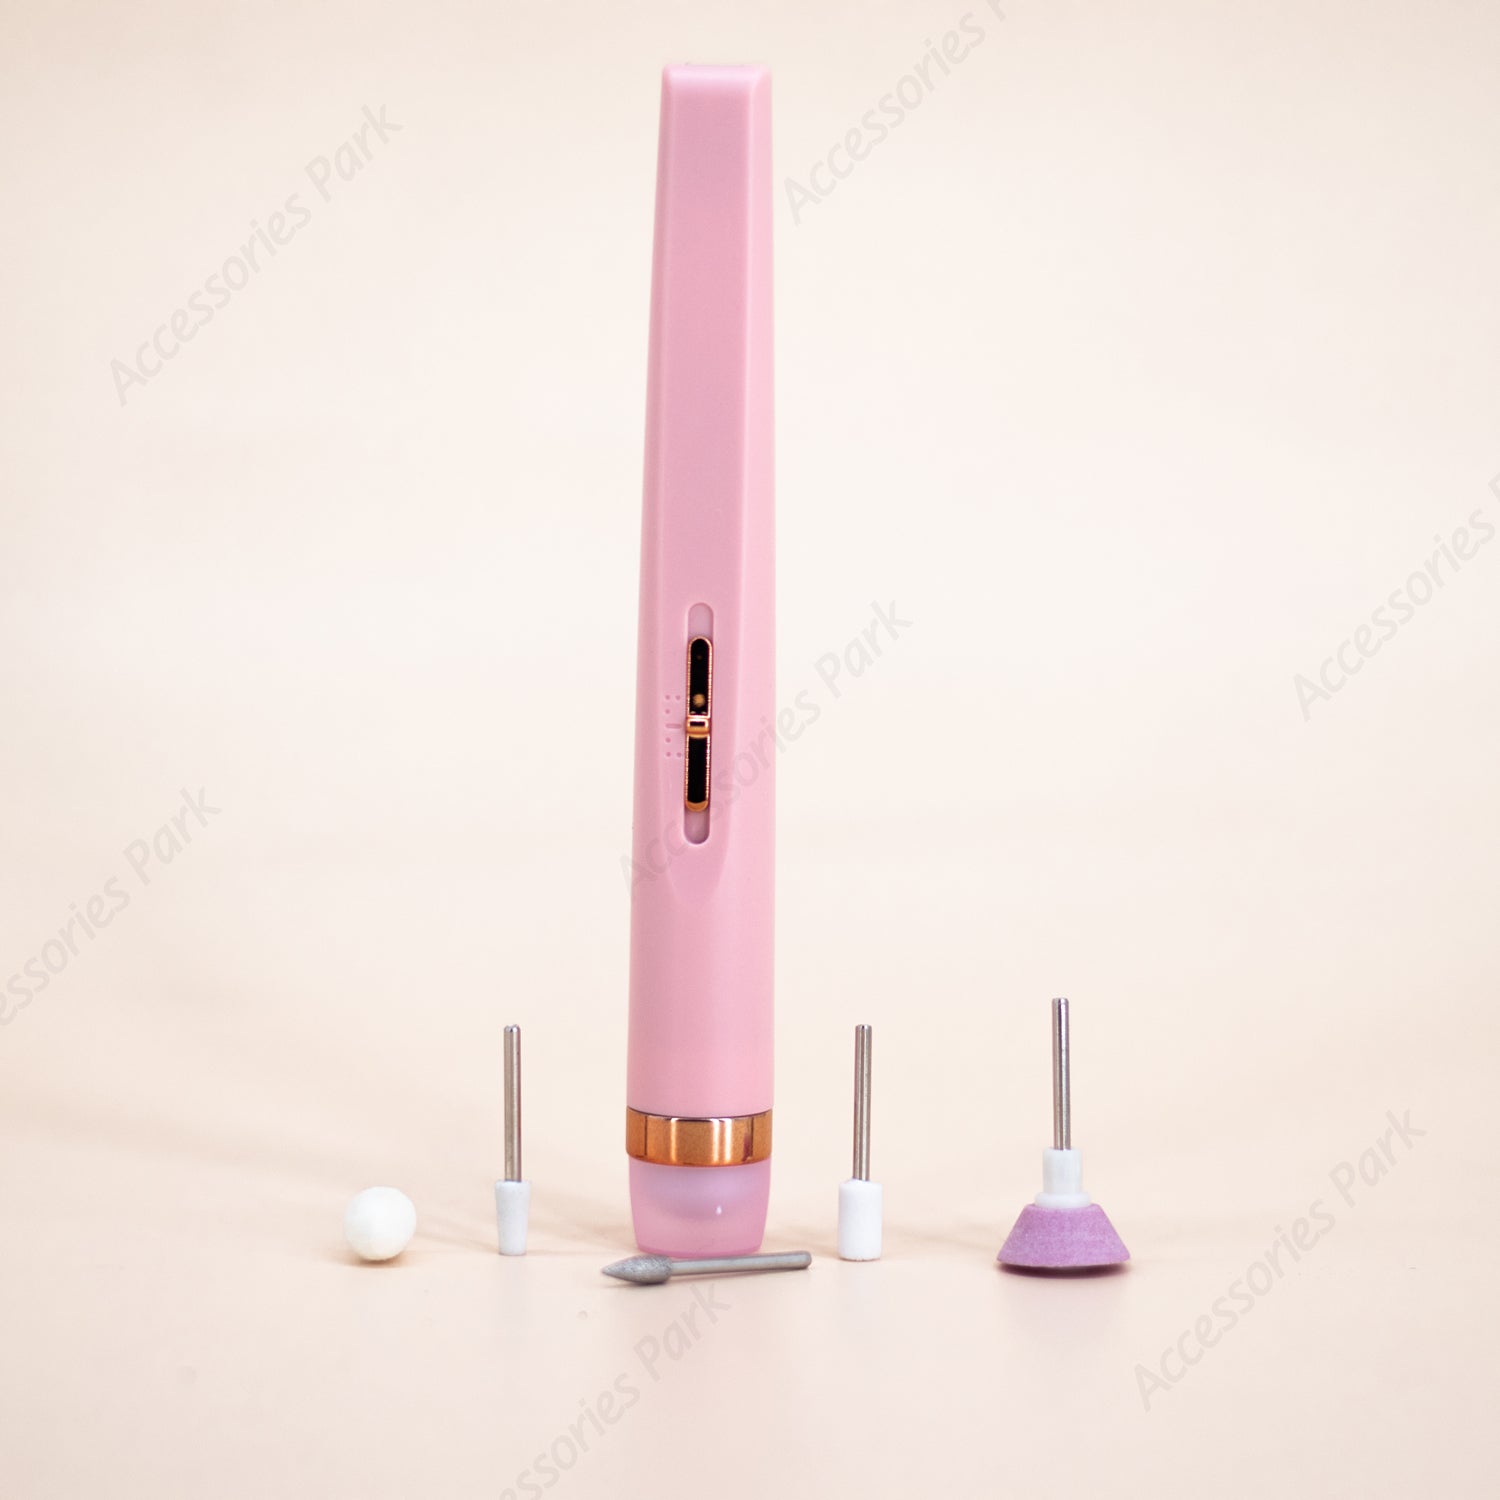 A pink color manicure device with five beads